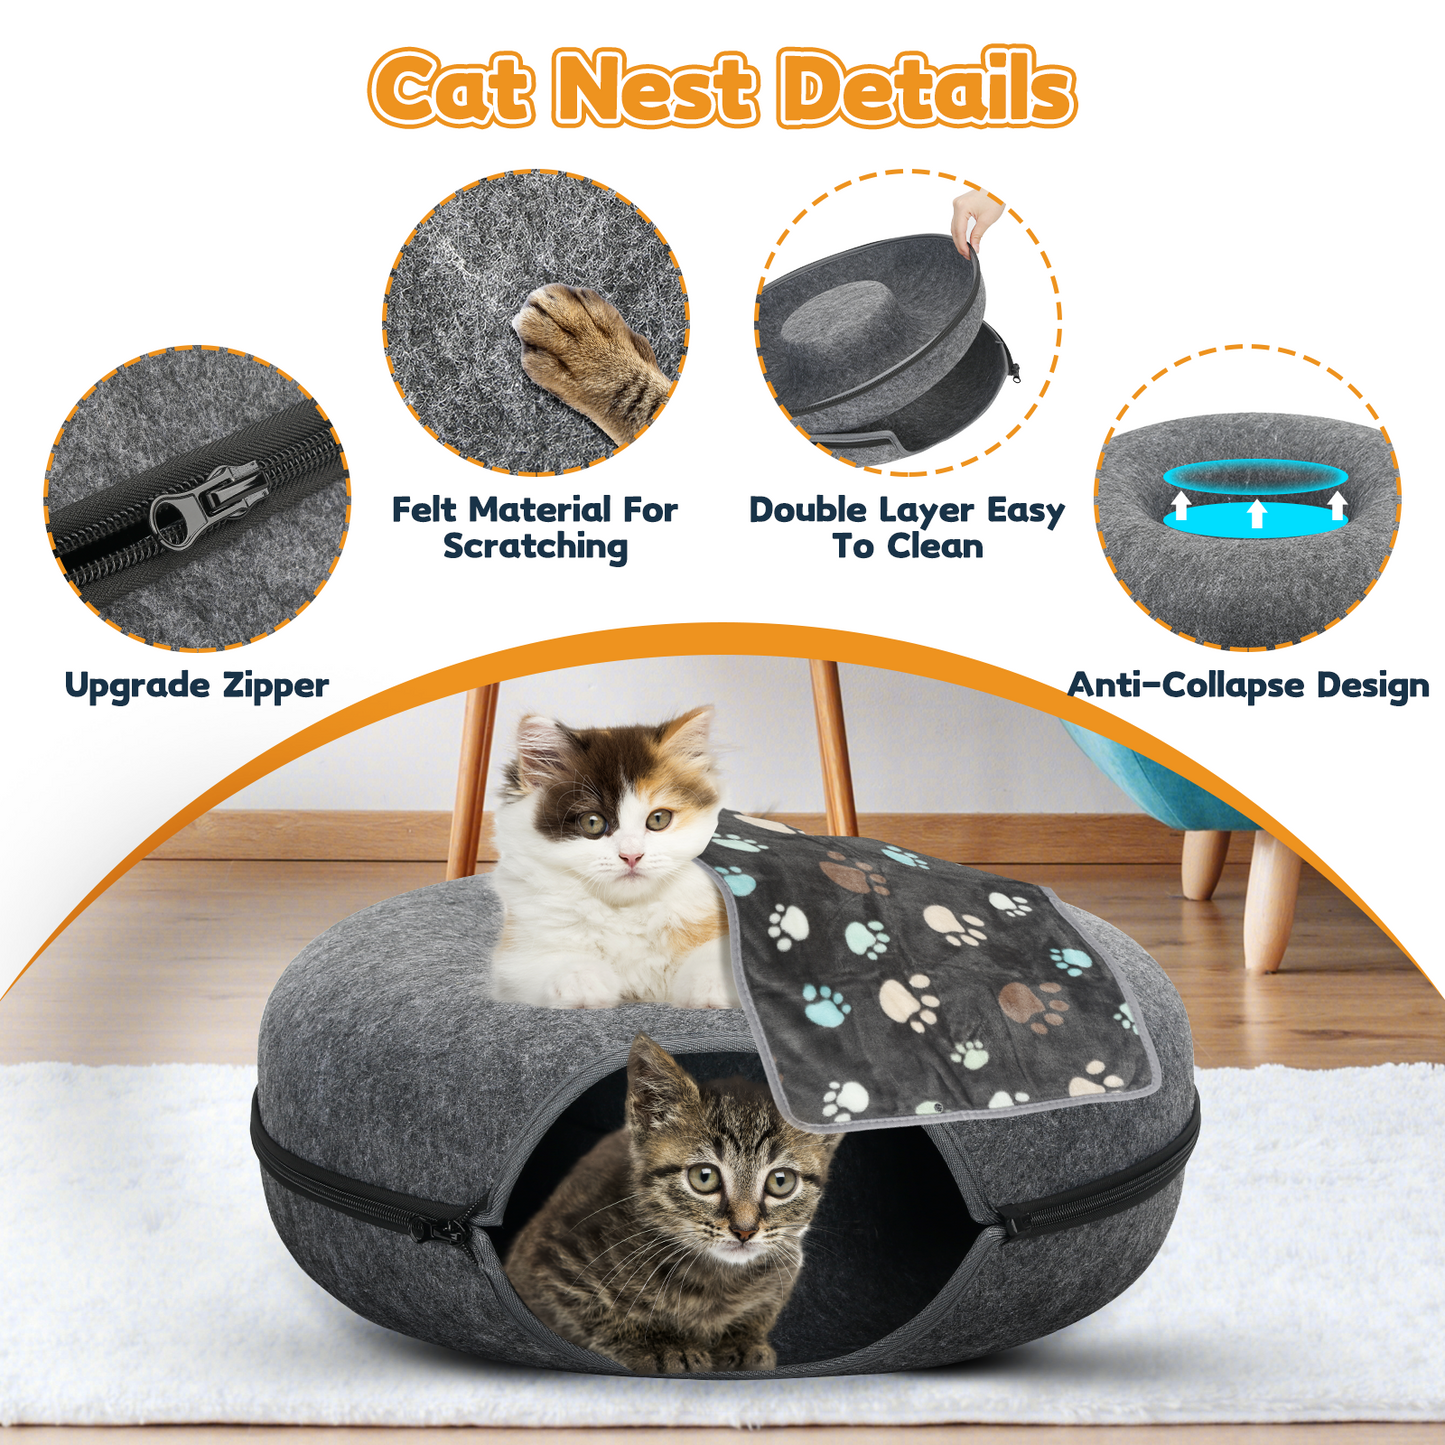 AOSION Peekaboo Cat Cave,Cat Donut Bed With Pet Blanket